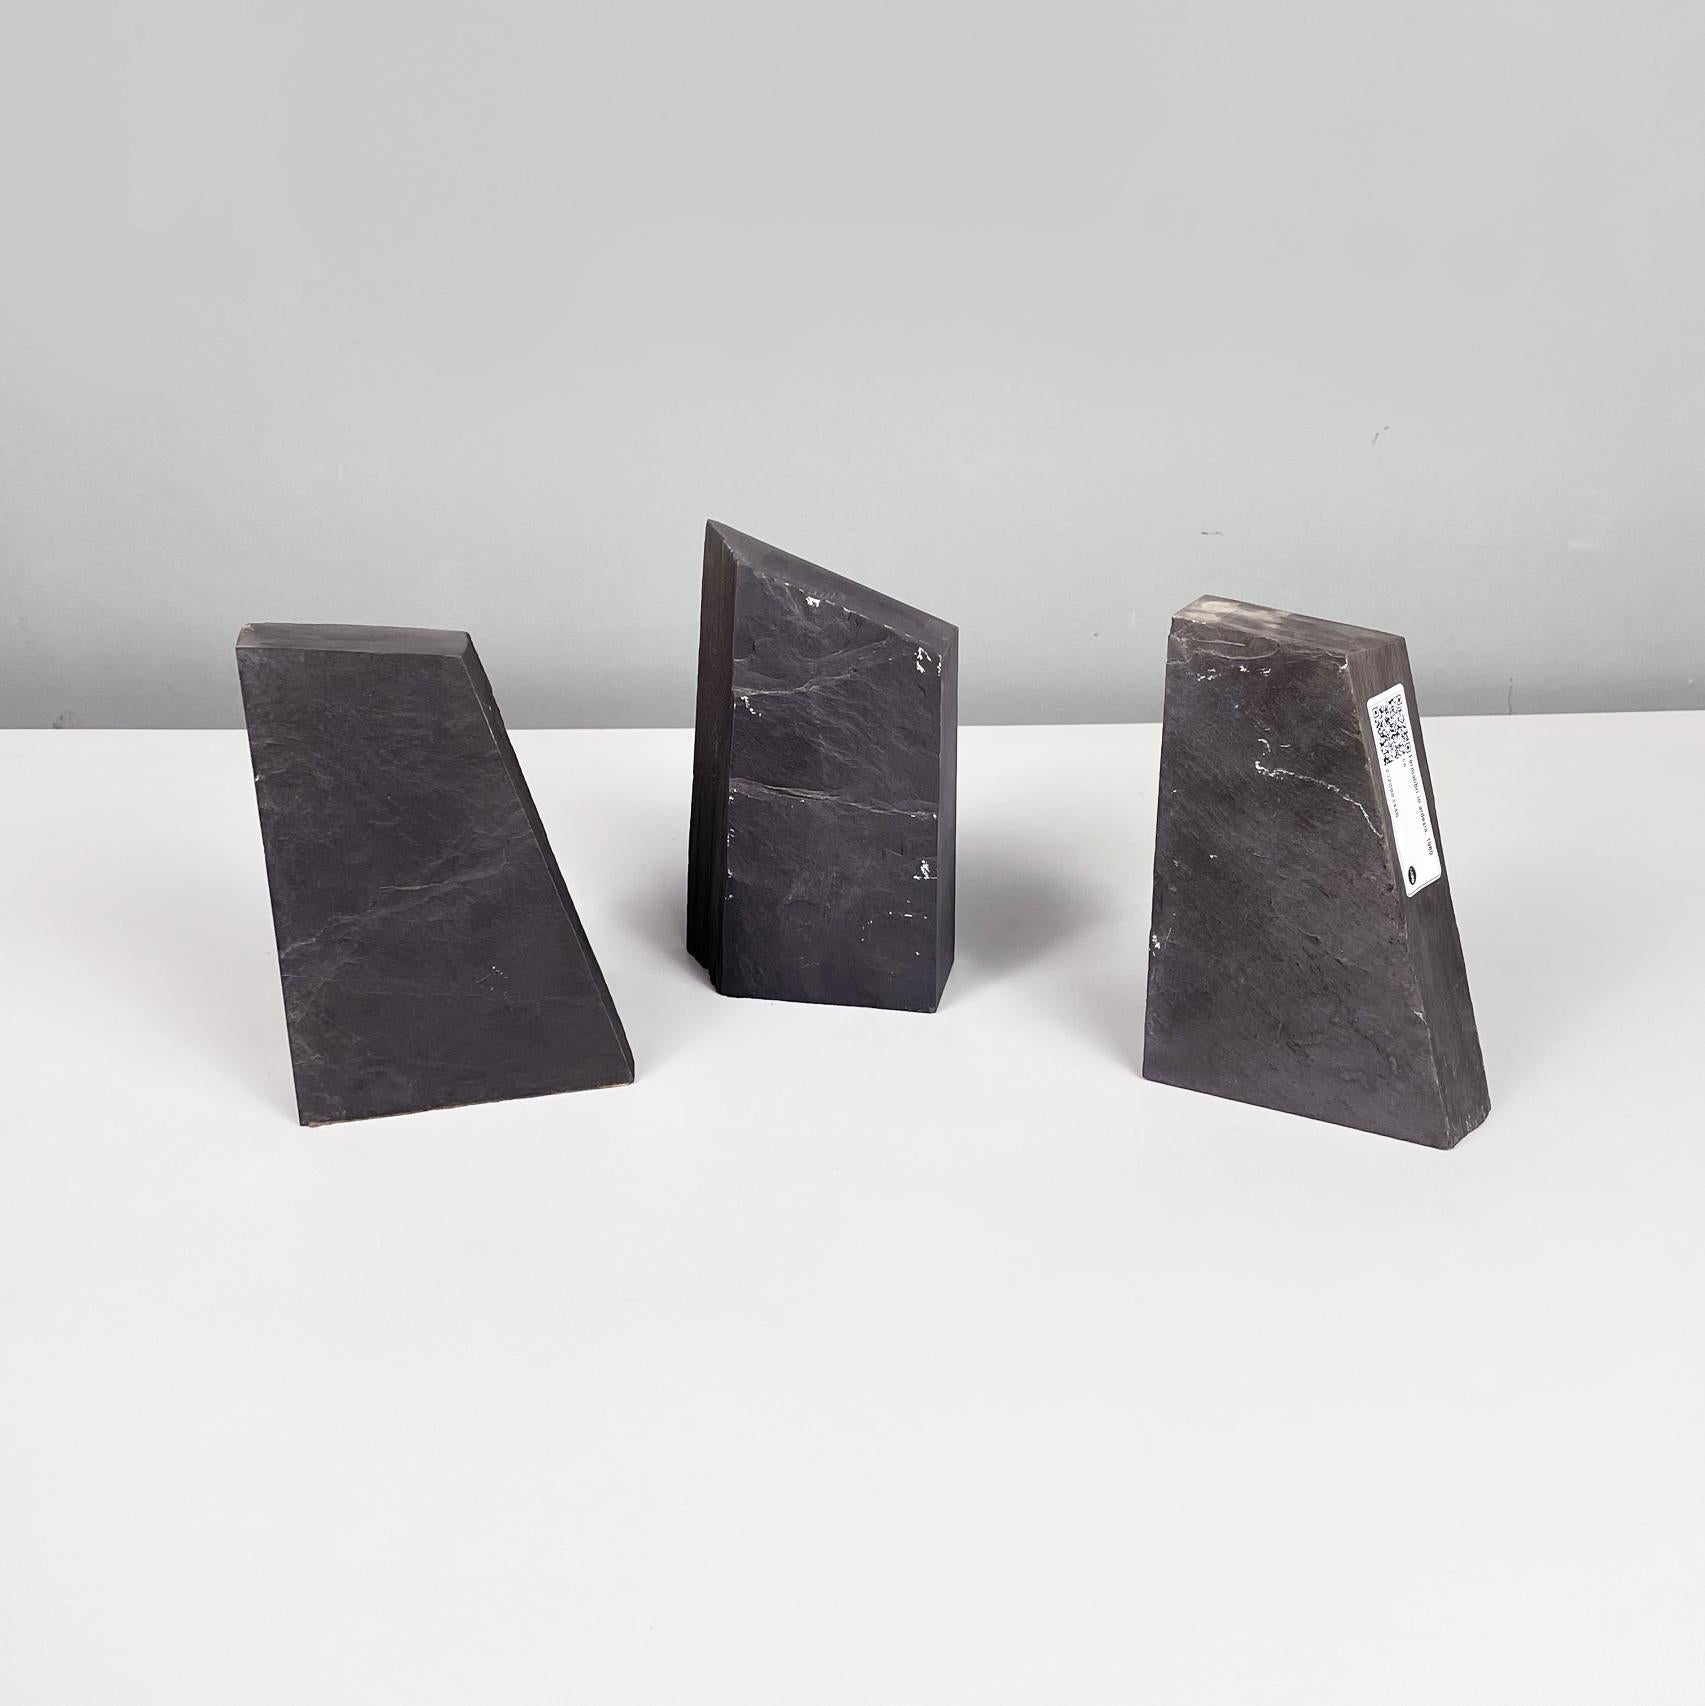 Italian modern sculpture bookends in black stone slate, 1980s
Set of three rectangular base sculptures in slate. The stone has an irregular shape. These knick-knacks can be used as aesthetic objects or as bookends.
1980s.
Very good conditions